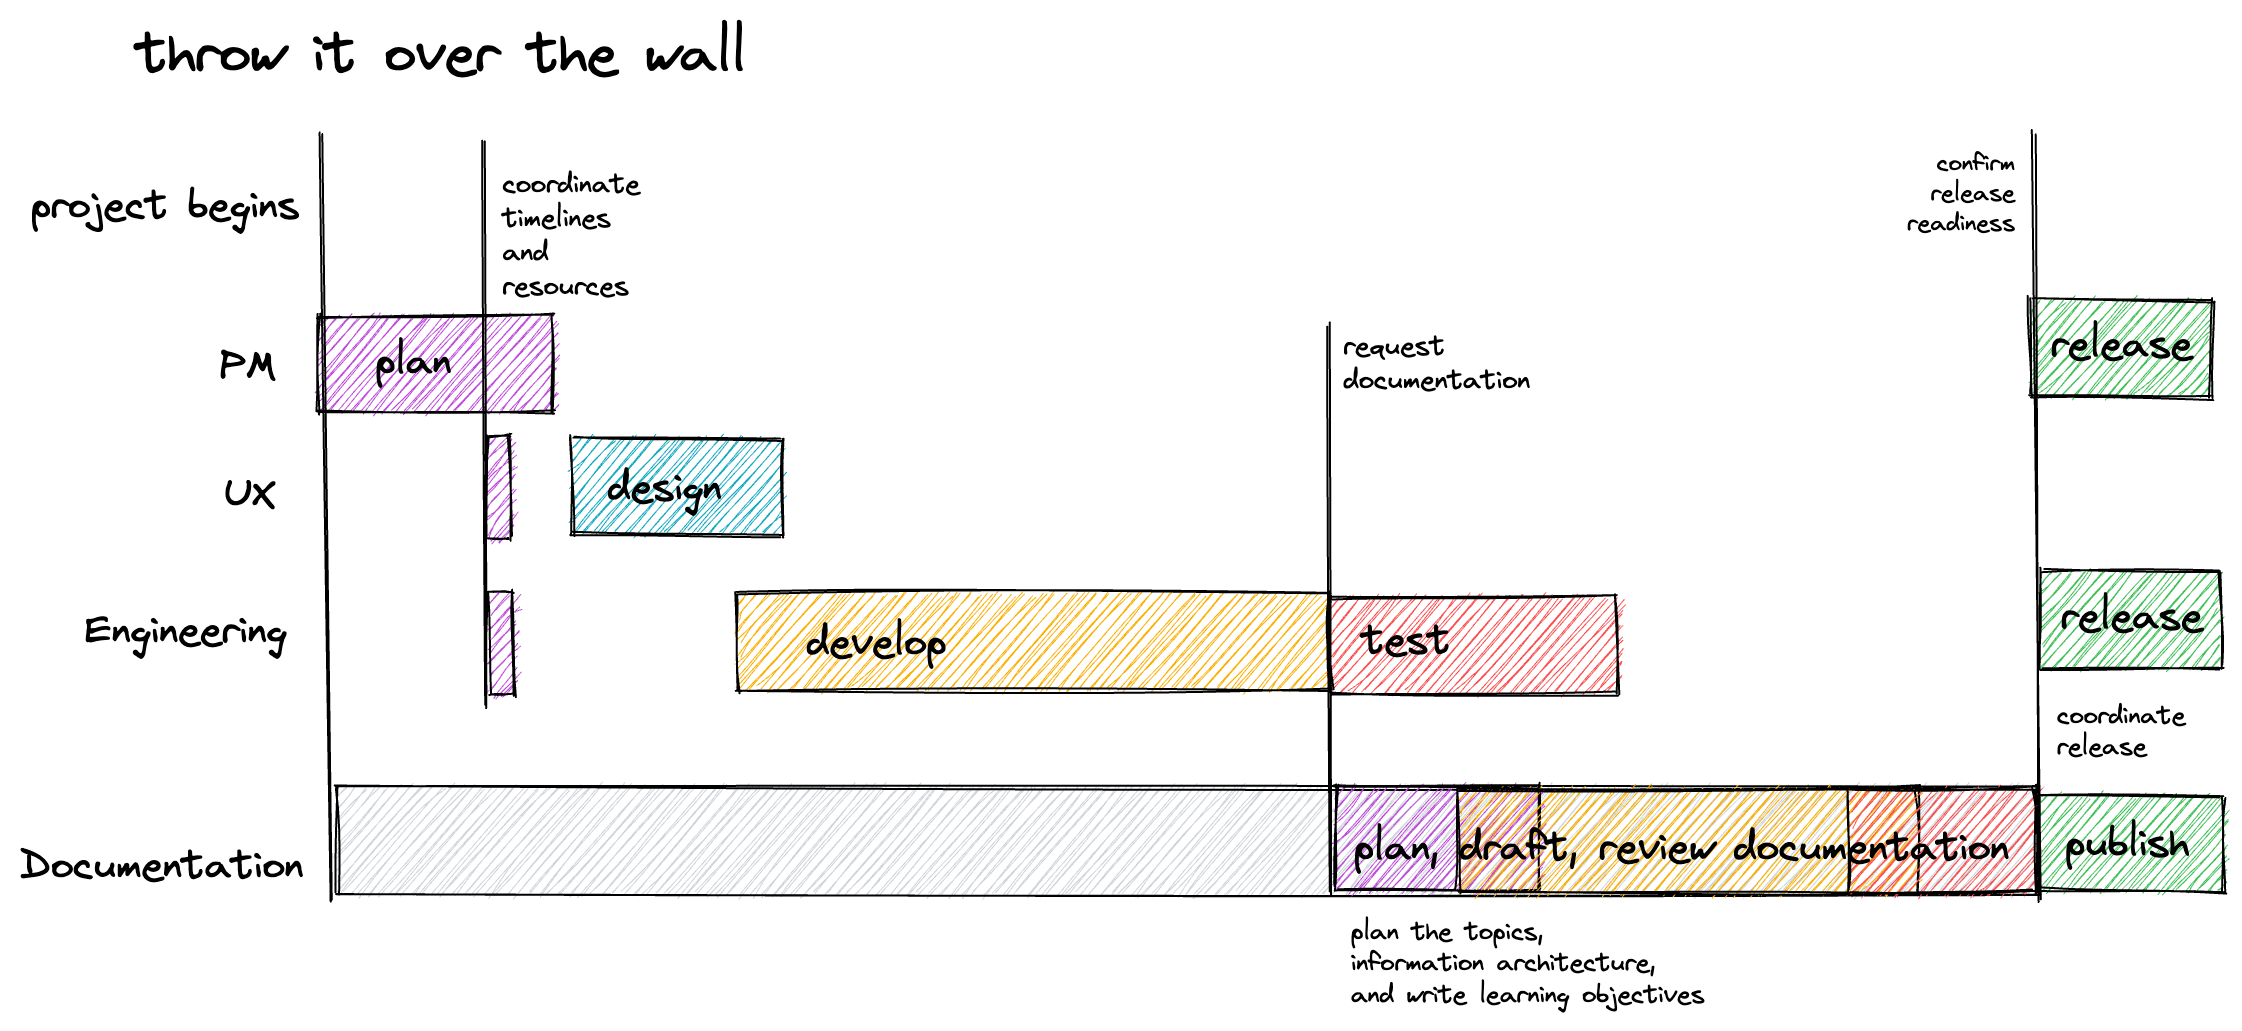 A timeline showing four different job duties, PM, UX, engineering, and documentation. The first three start planning, then design happens, then development happens, then after development finishes, PM requests documentation and documentation plans, drafts, and reviews the documentation while development finishes testing, then there is a coordinated release.